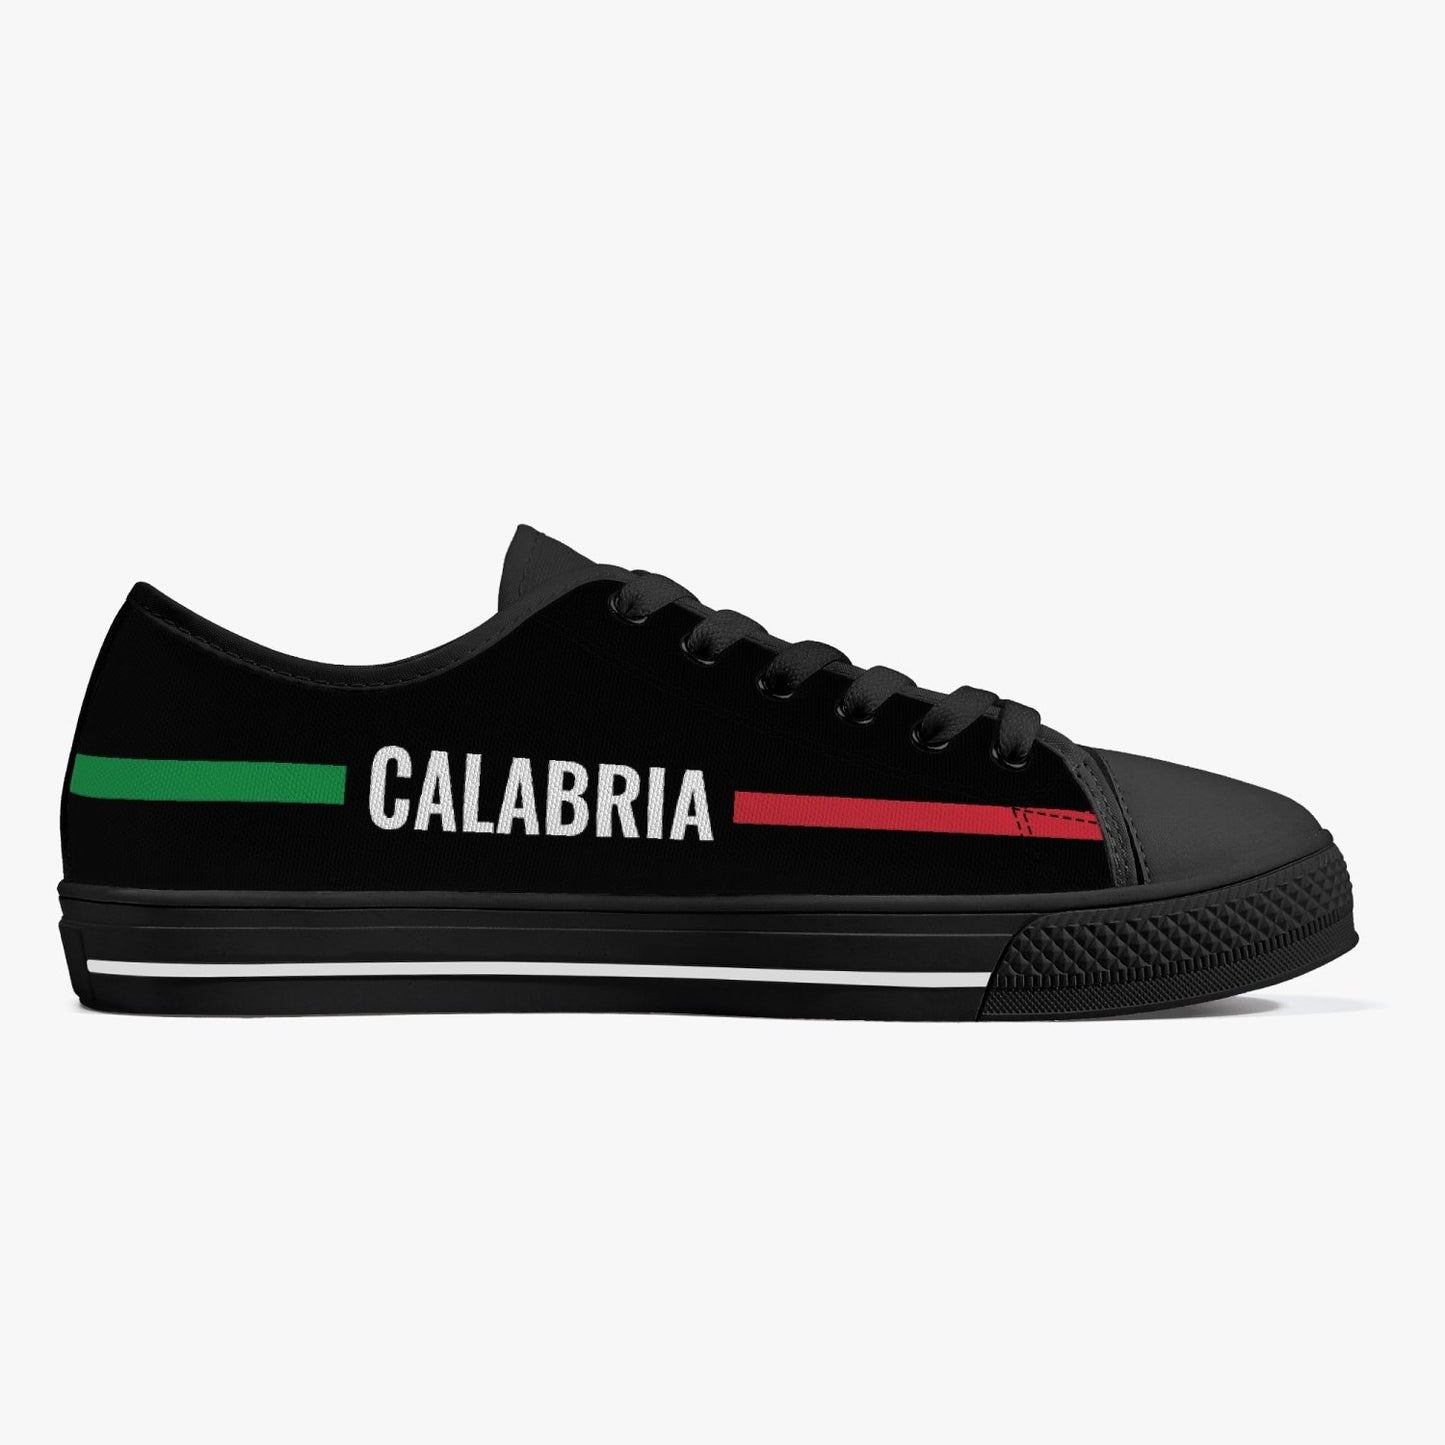 Low-Top Shoes - Calabria - women's